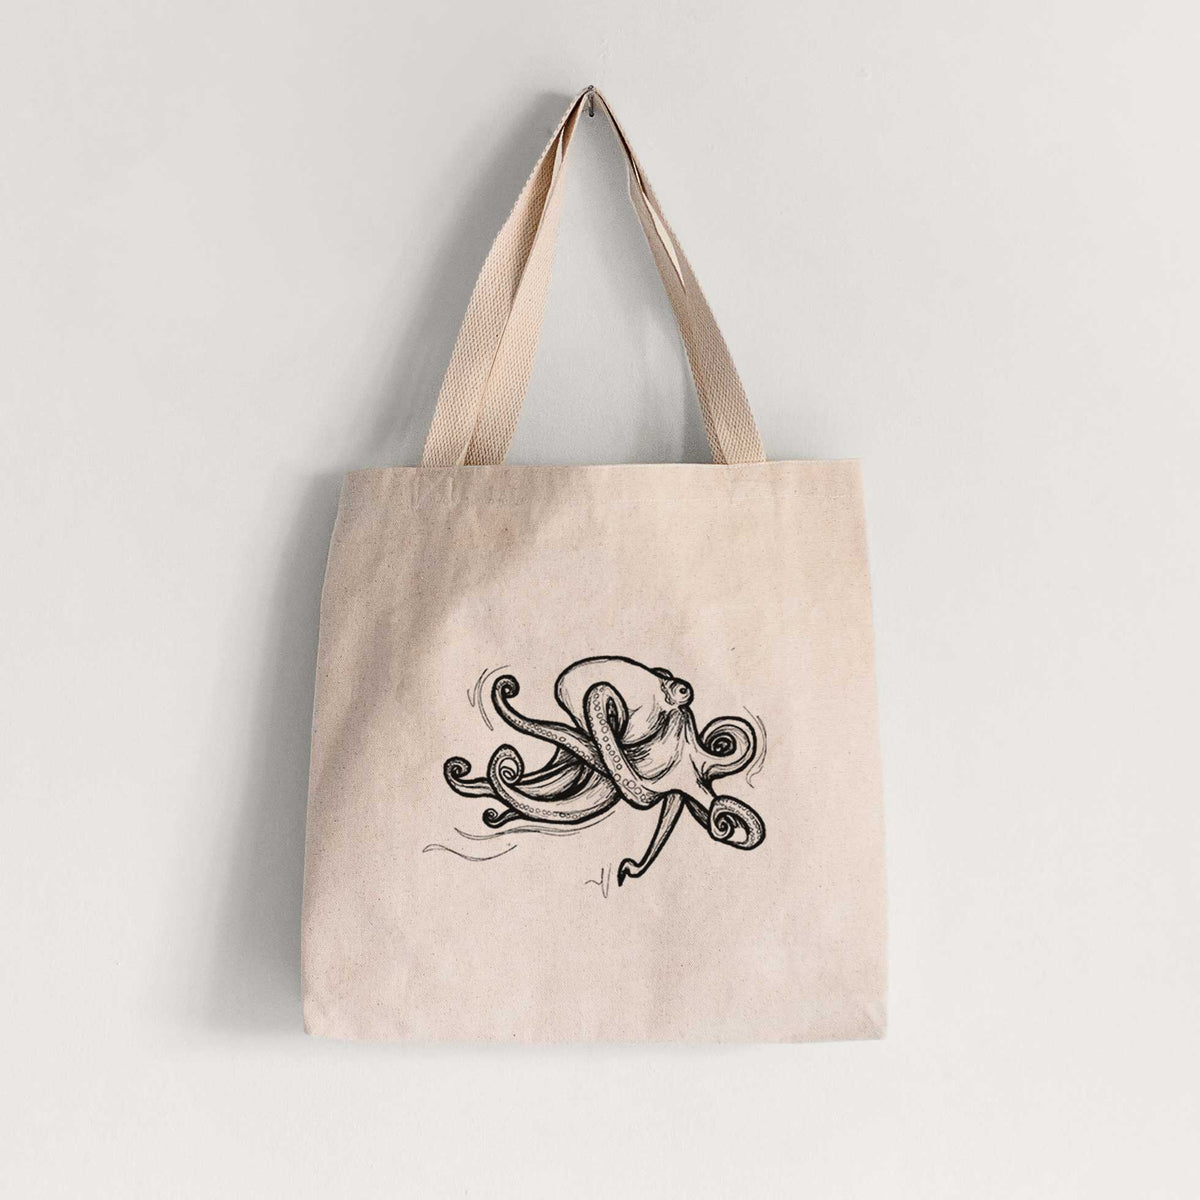 Giant Pacific Octopus - Tote Bag